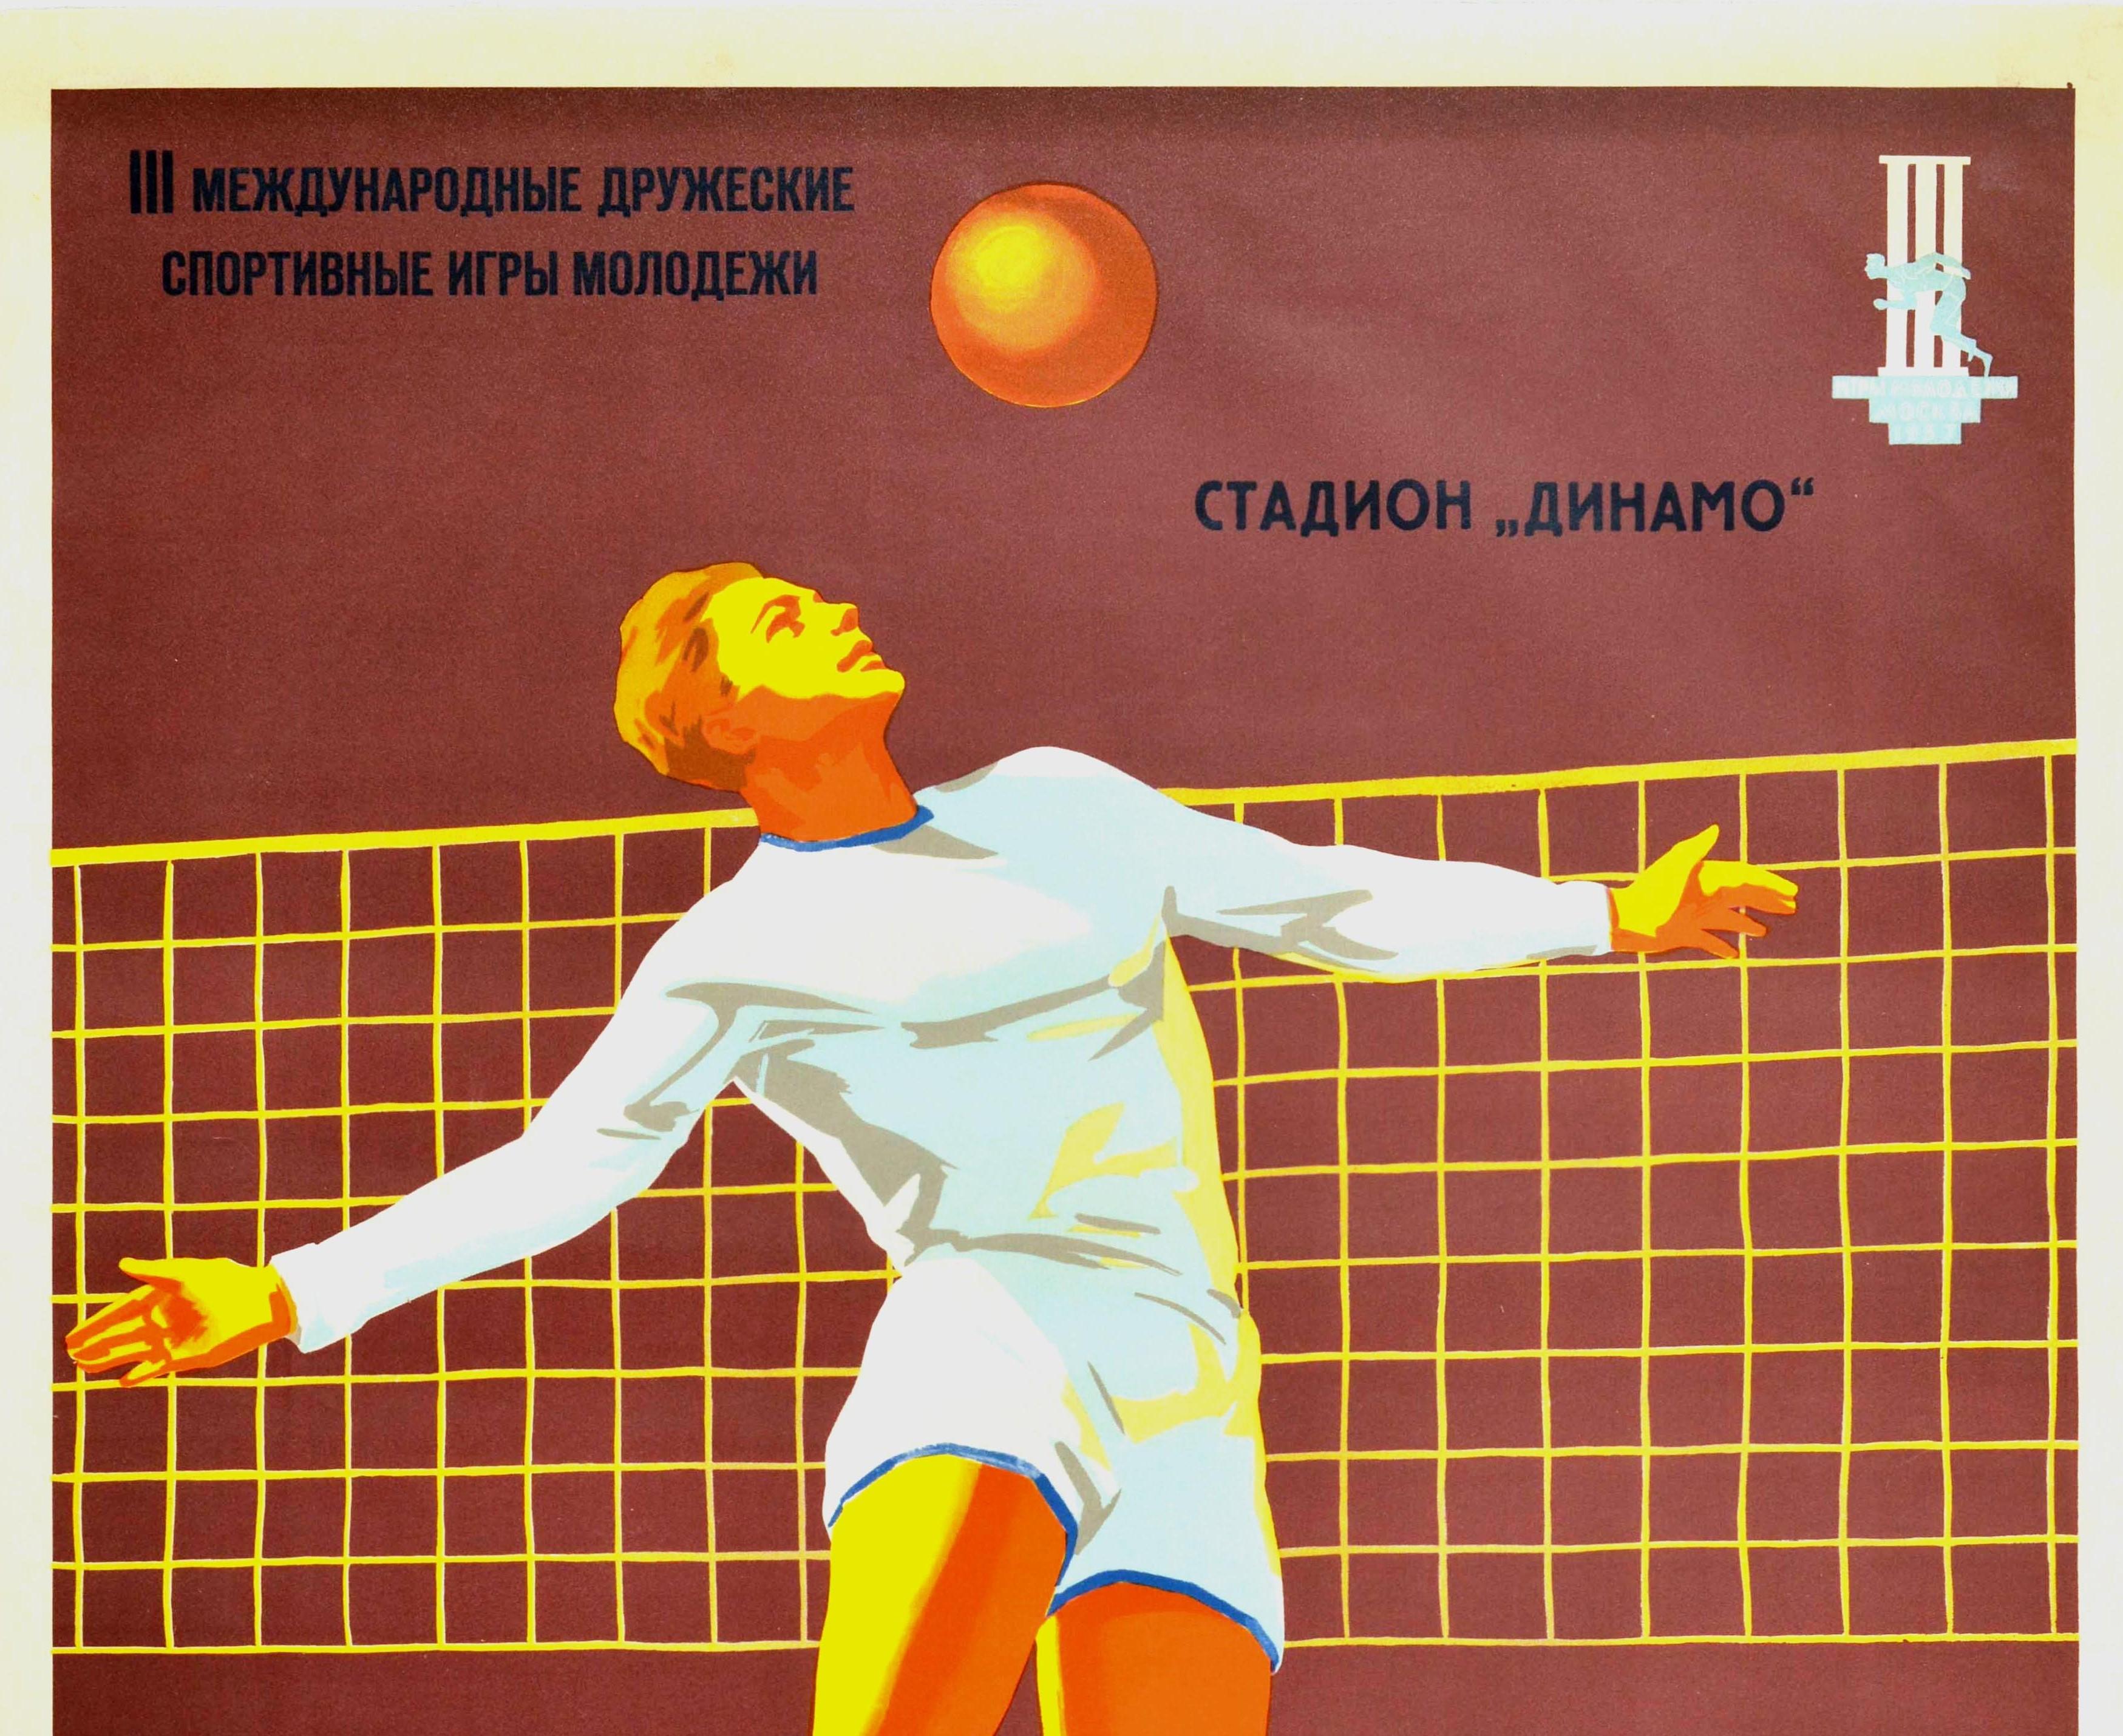 Original Vintage Poster Volleyball Friendship Moscow Youth Games Dynamo Stadium - Print by Unknown